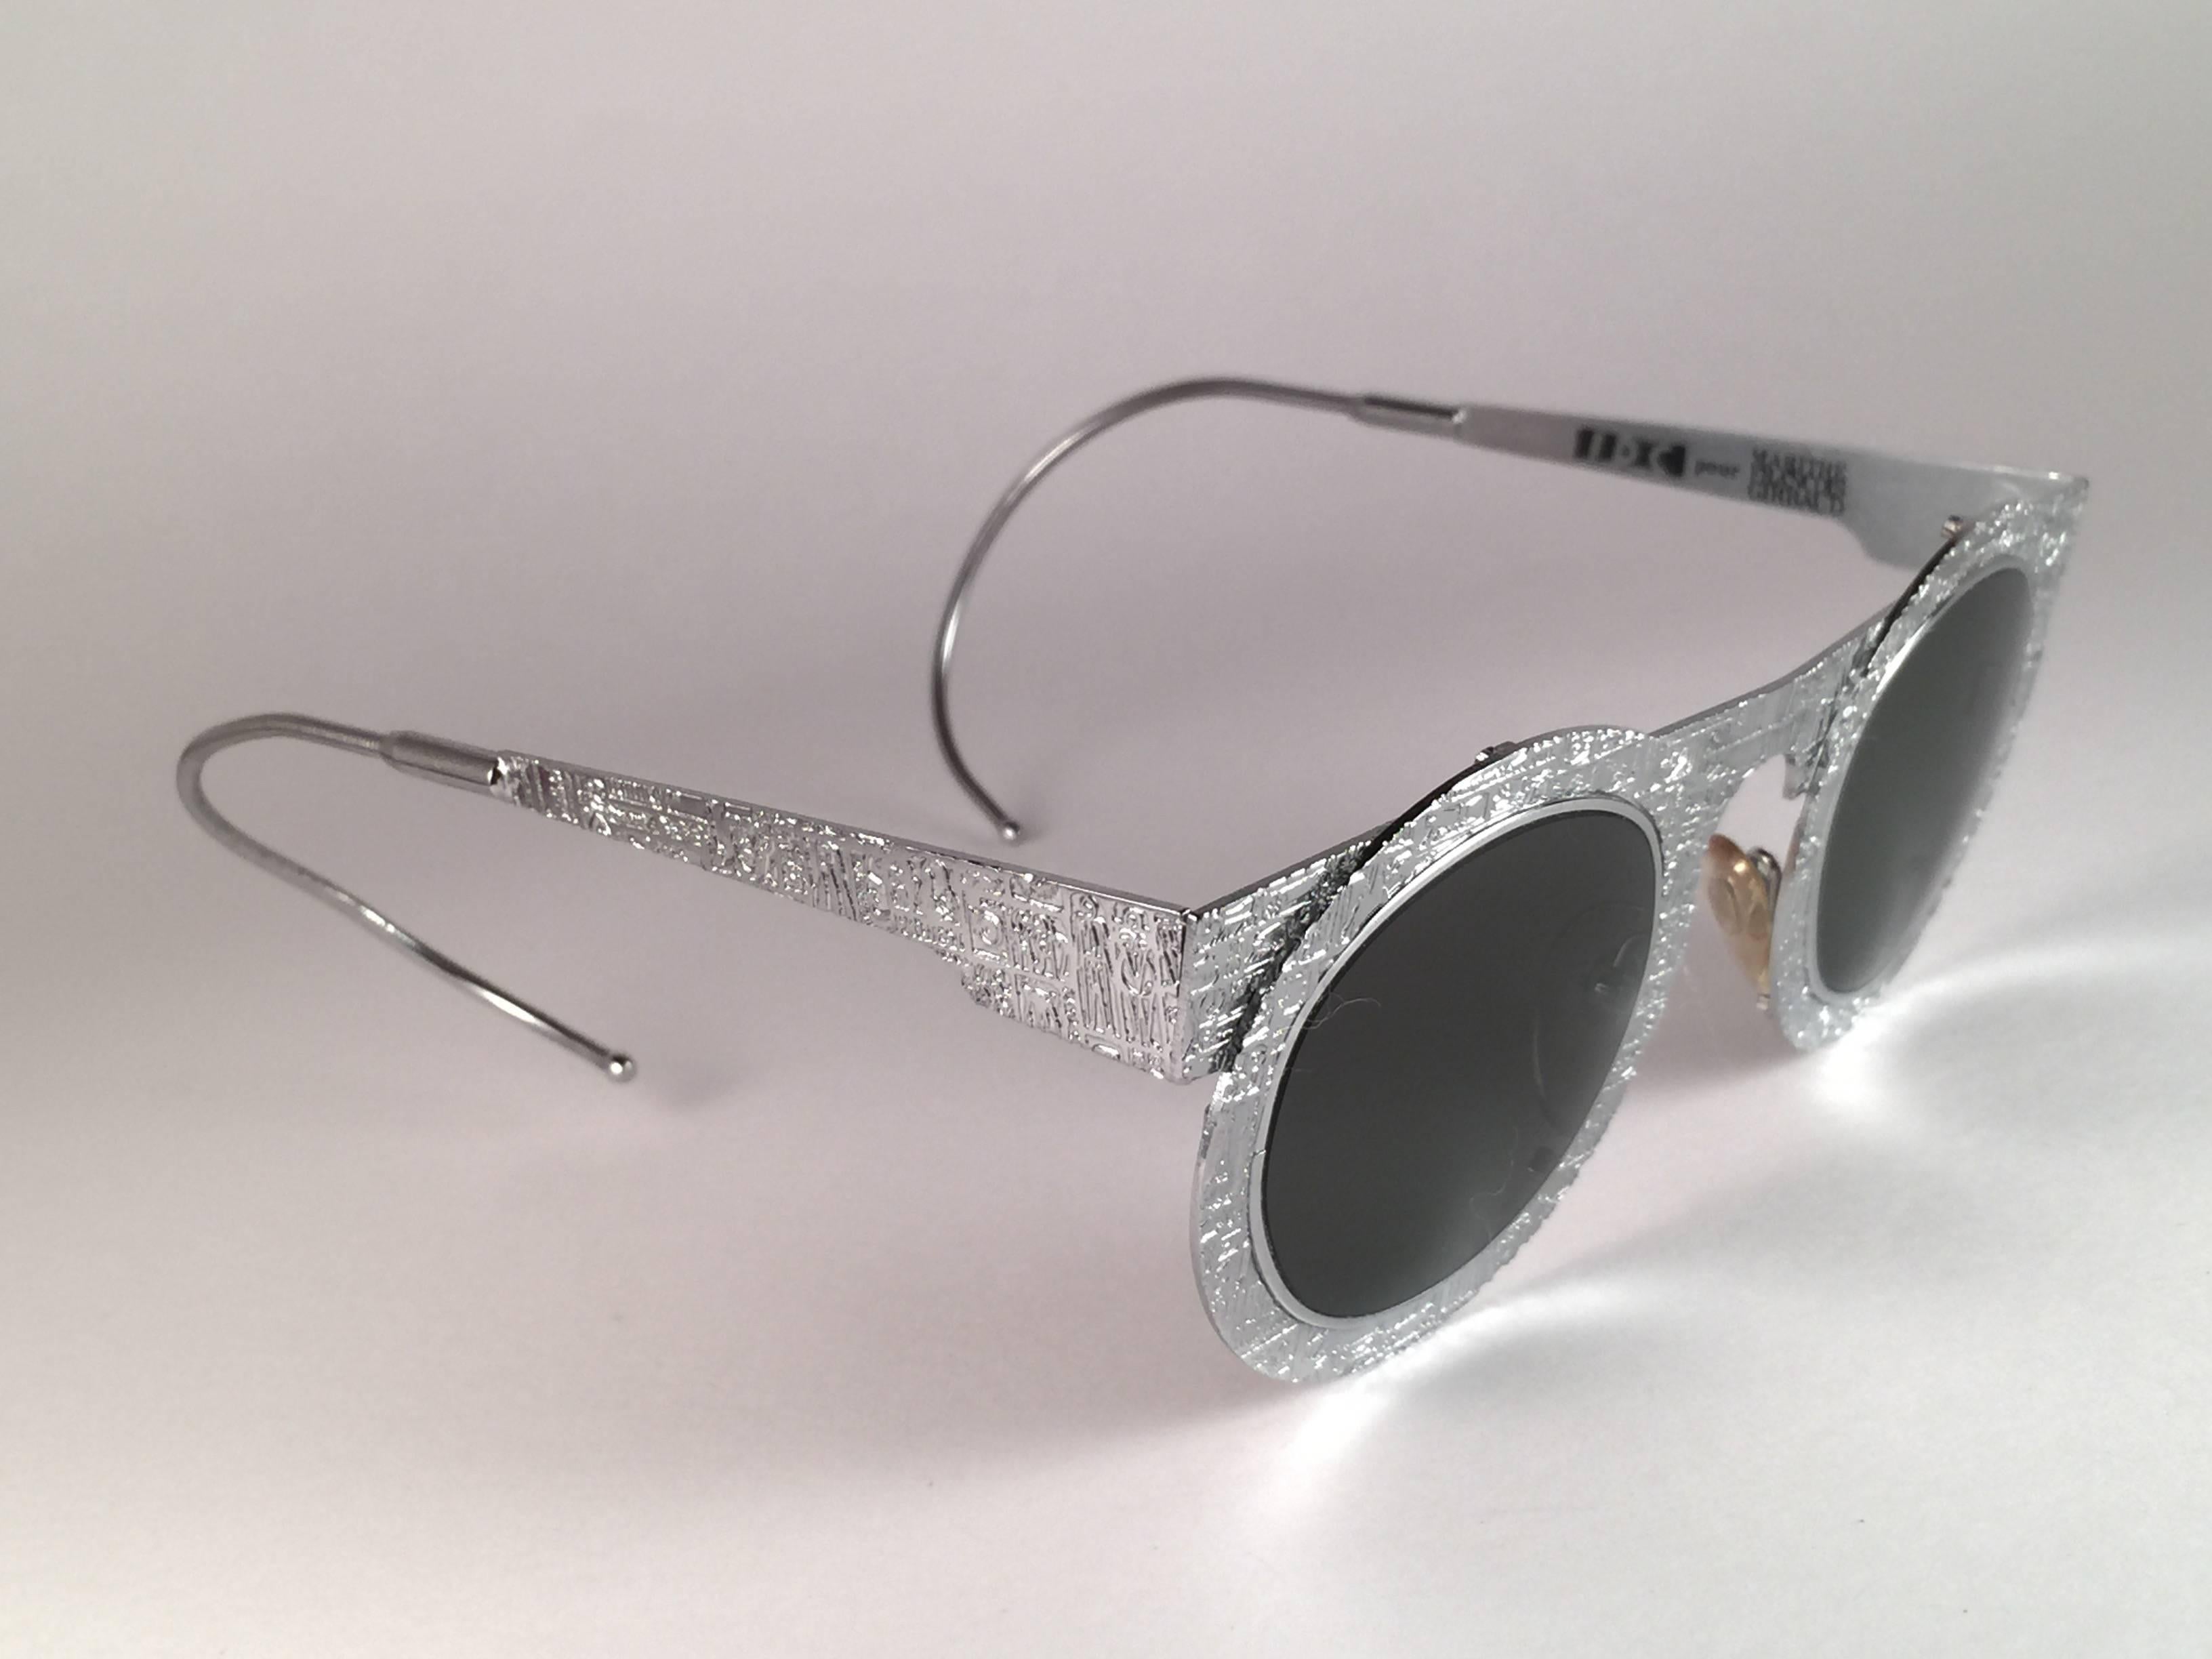 

IDC Pour Marithe Francois Girbaud round silver with engraved accents sunglasses holding a spotless pair of G15 grey lenses. Curled temples for a fashionable yet comfortable wear.

New, never worn or displayed. Made in France.